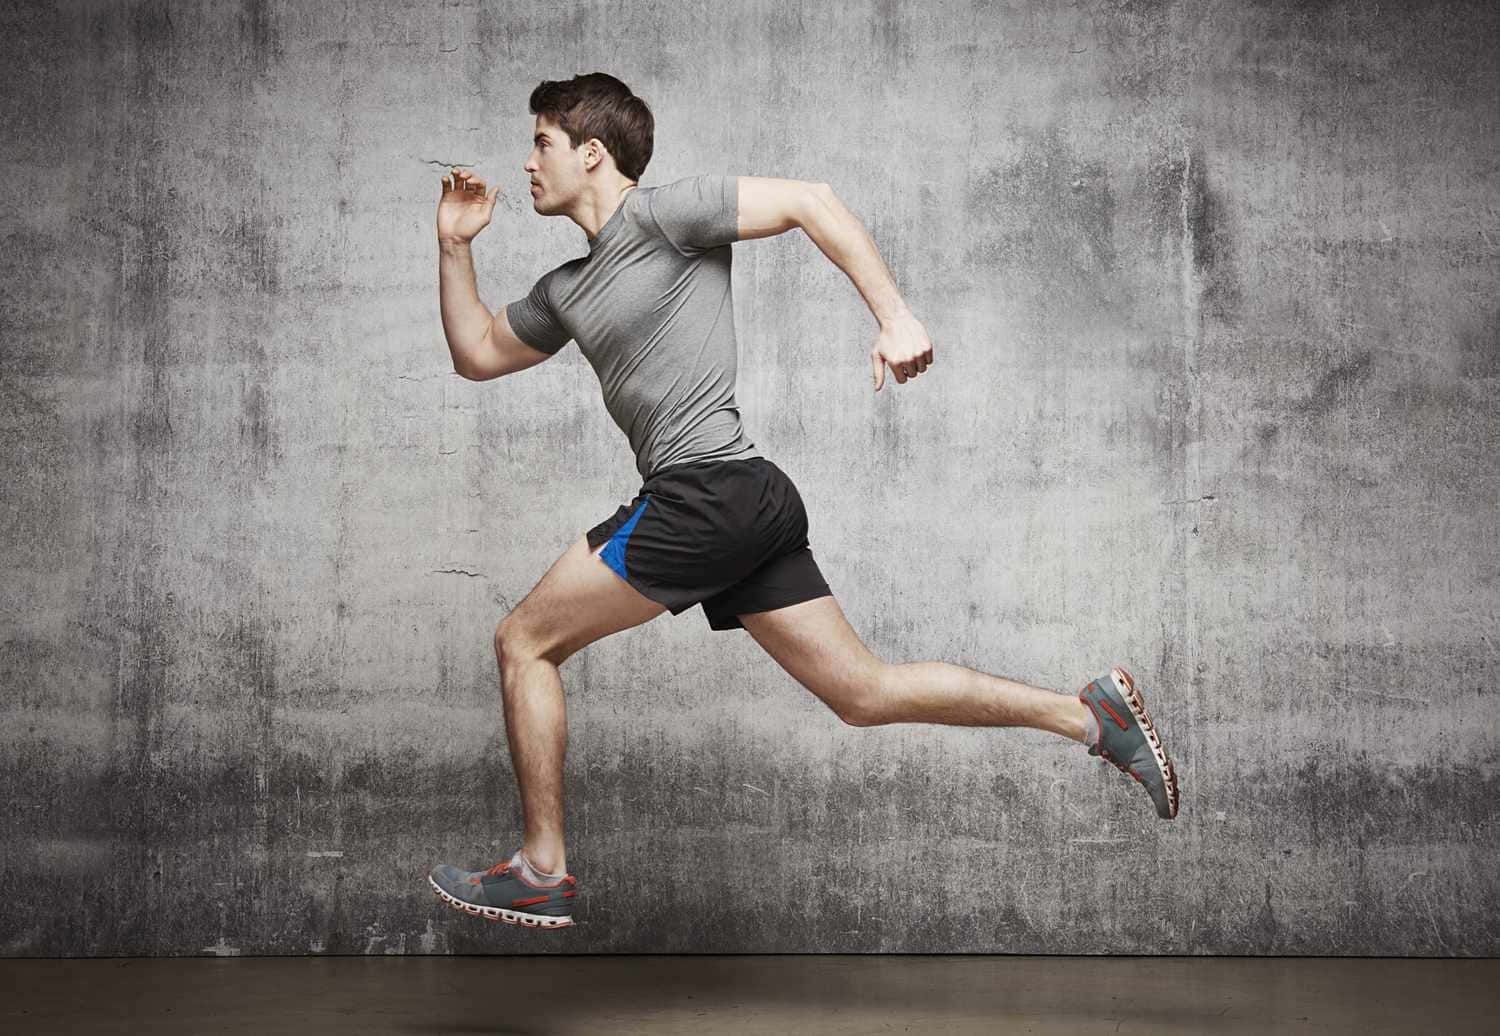 Download A Man Running In Front Of A Concrete Wall | Wallpapers.com